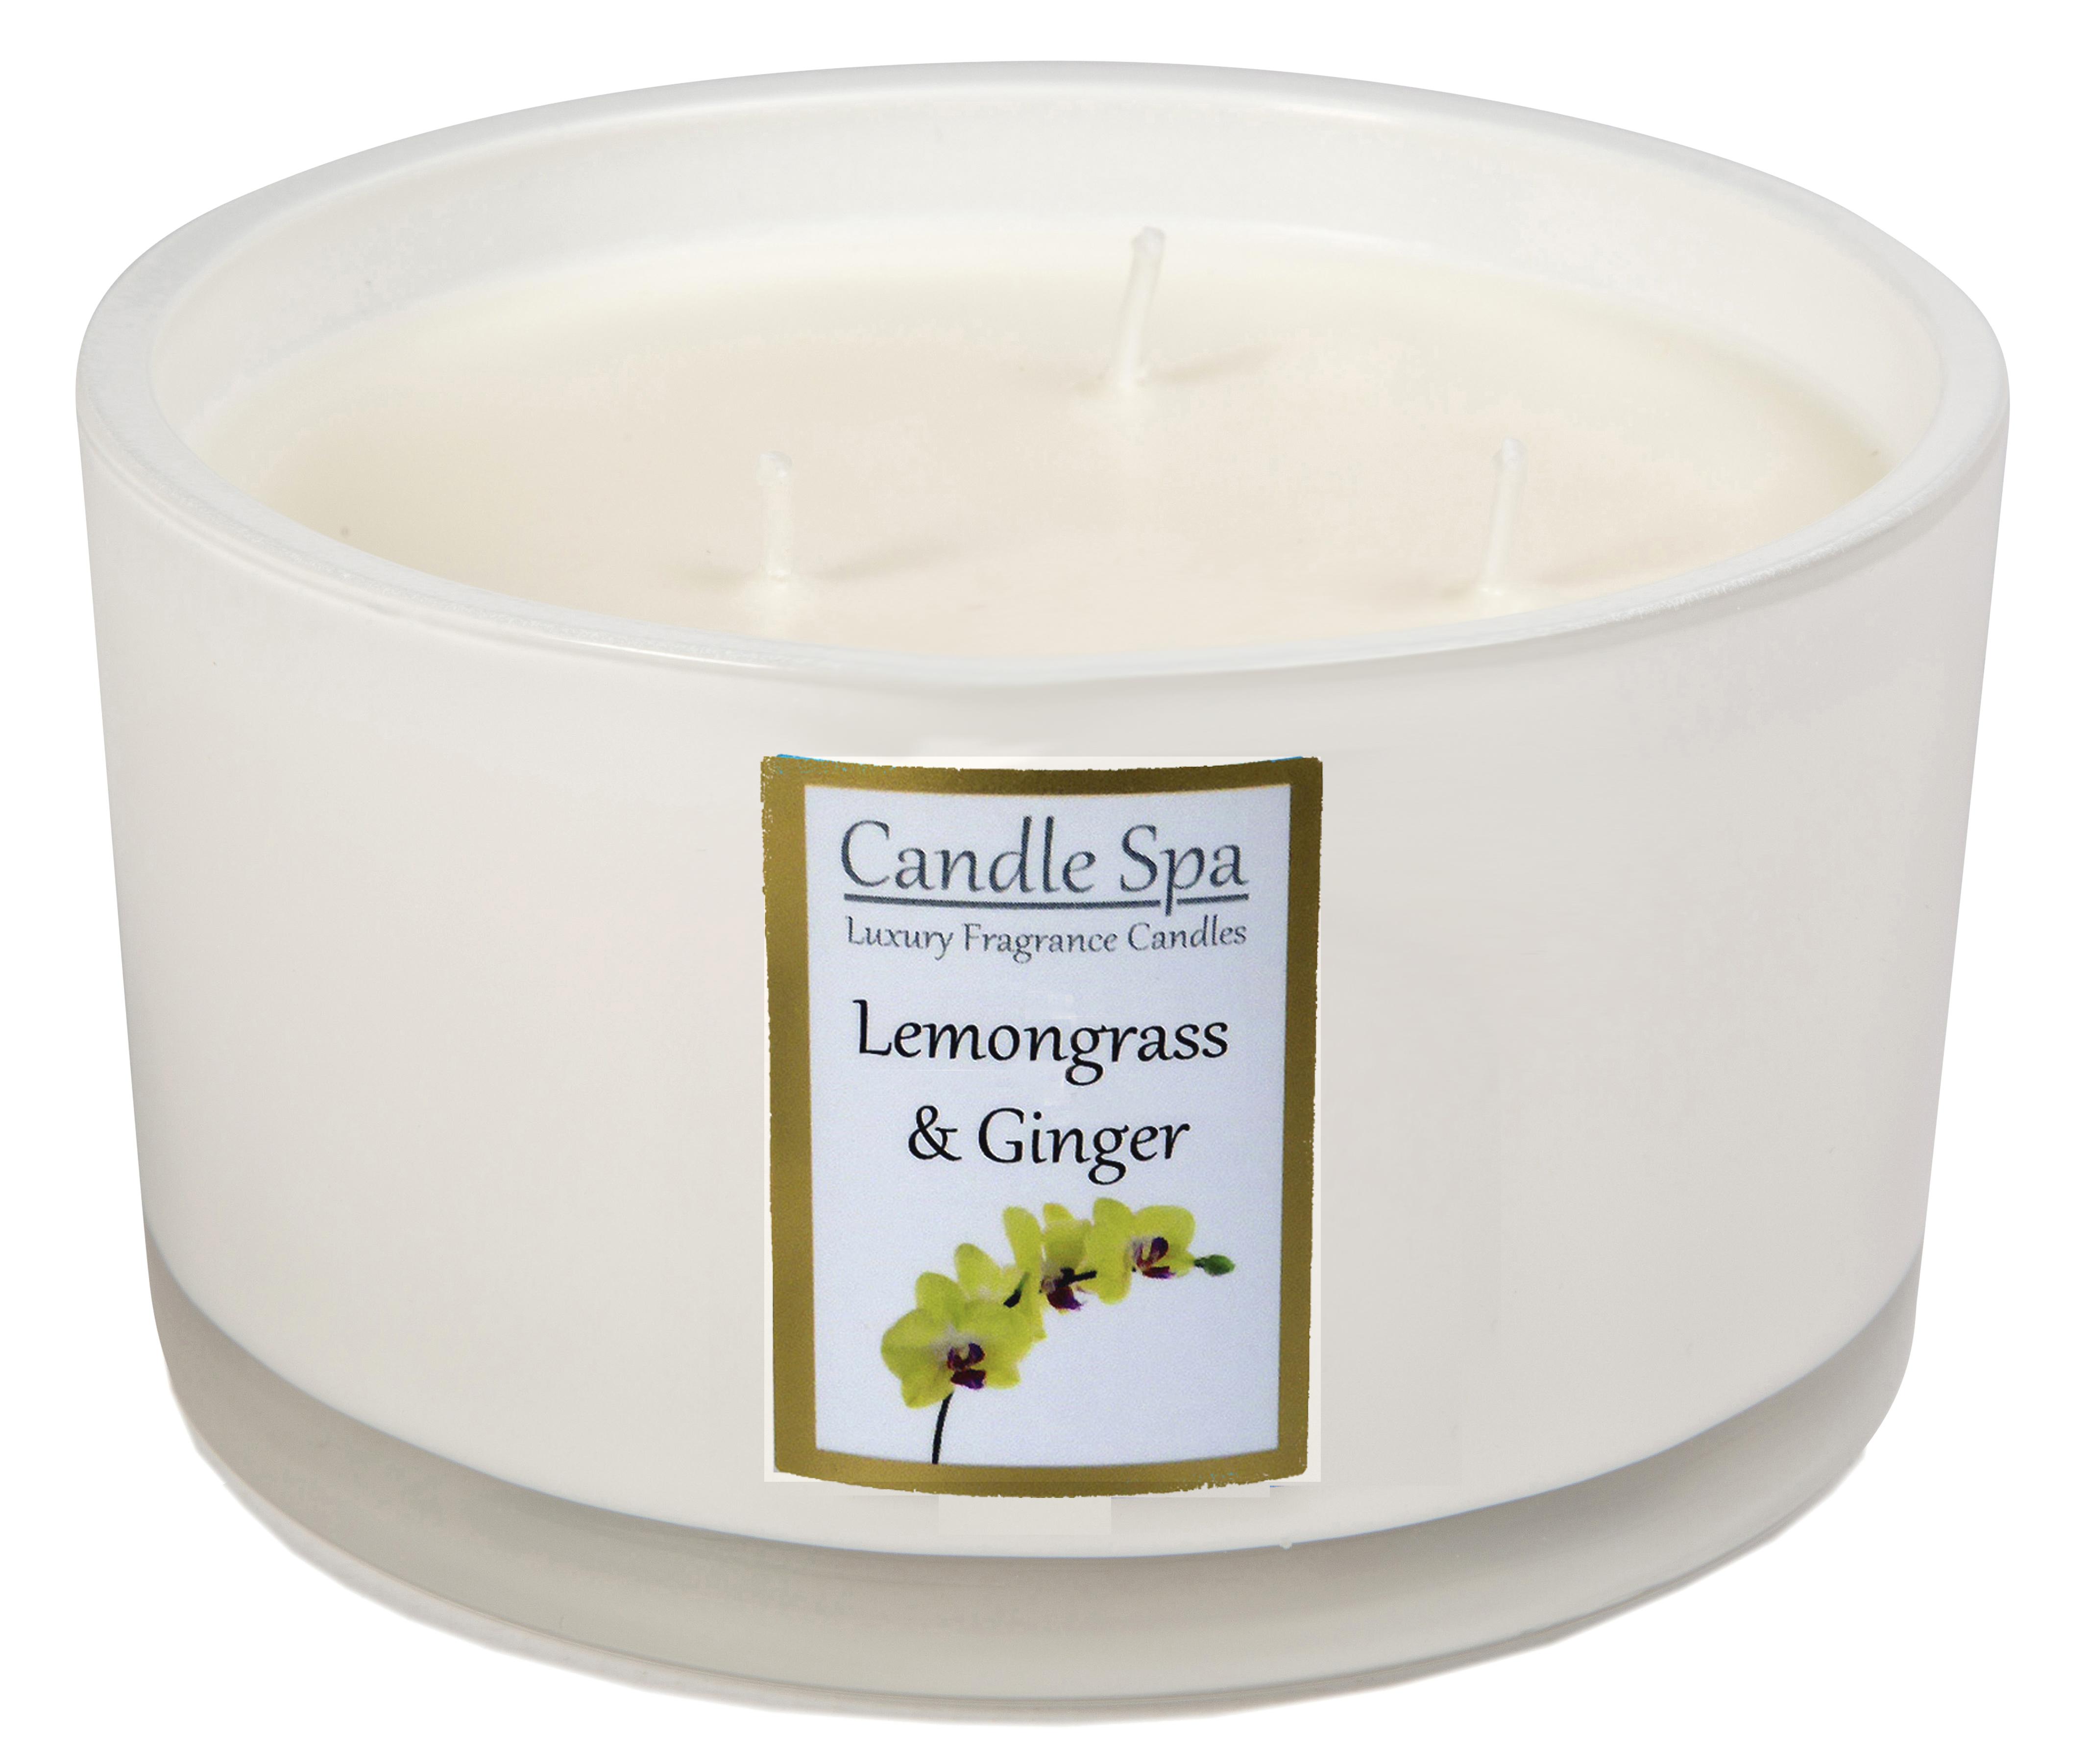 Candle Spa Luxury 3-Wick Candle - Lemongrass & Ginger